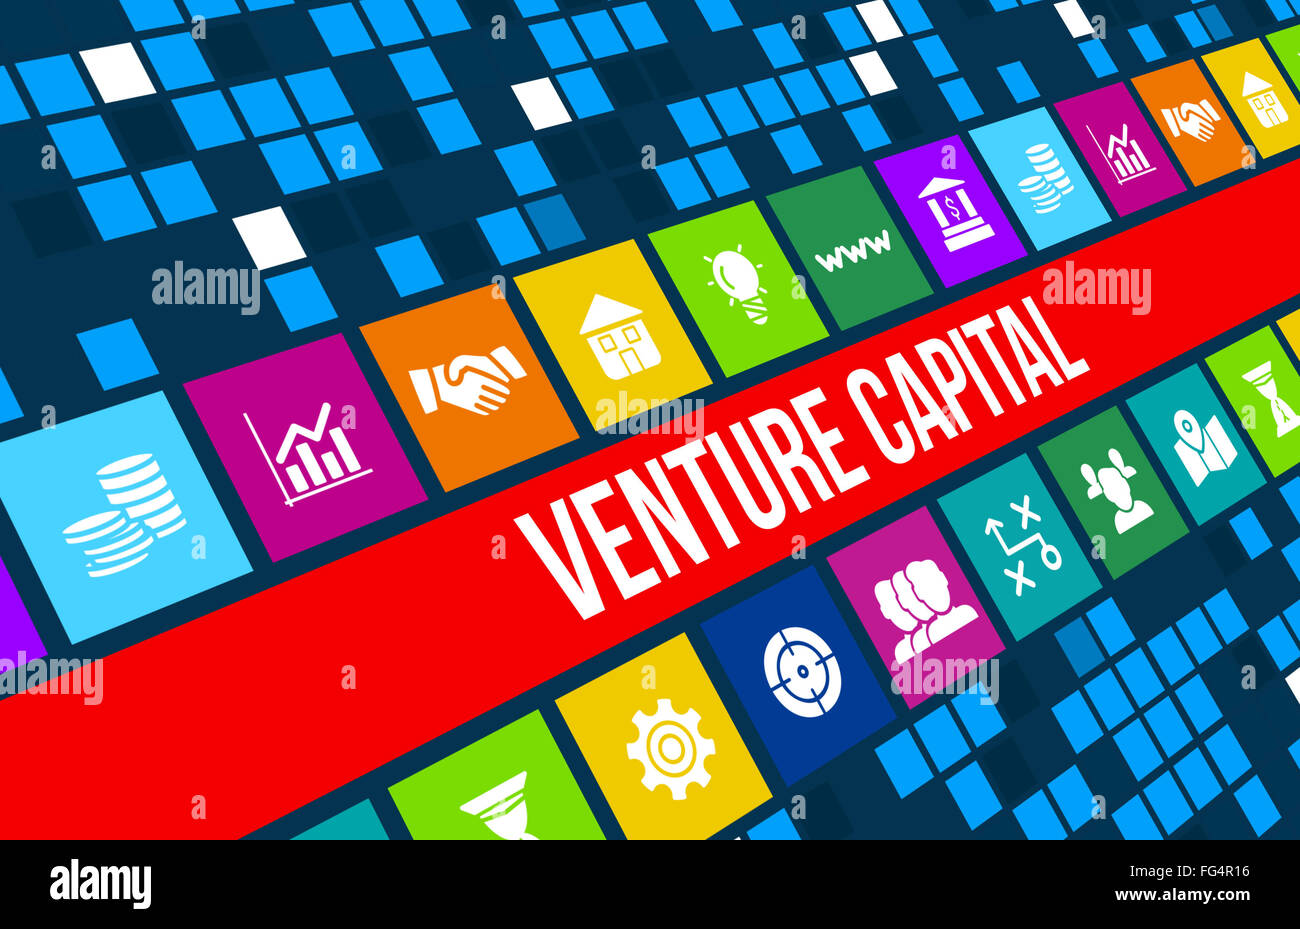 Venture Capital  concept image with business icons and copyspace. Stock Photo